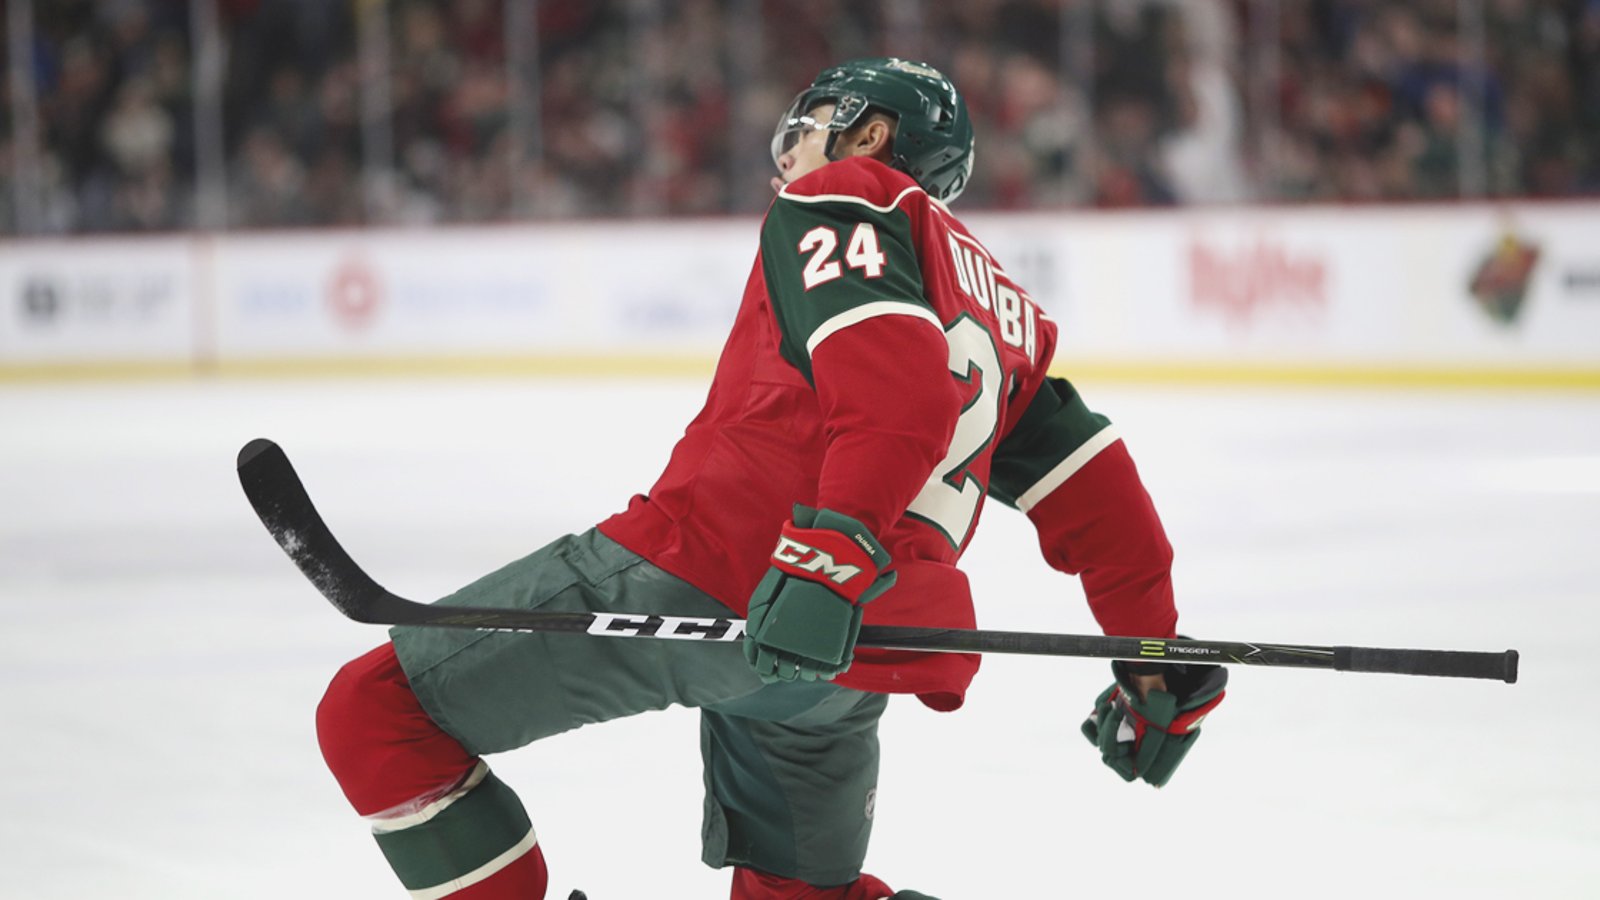 REPORT: The Minnesota Wild could reach an important milestone tonight!